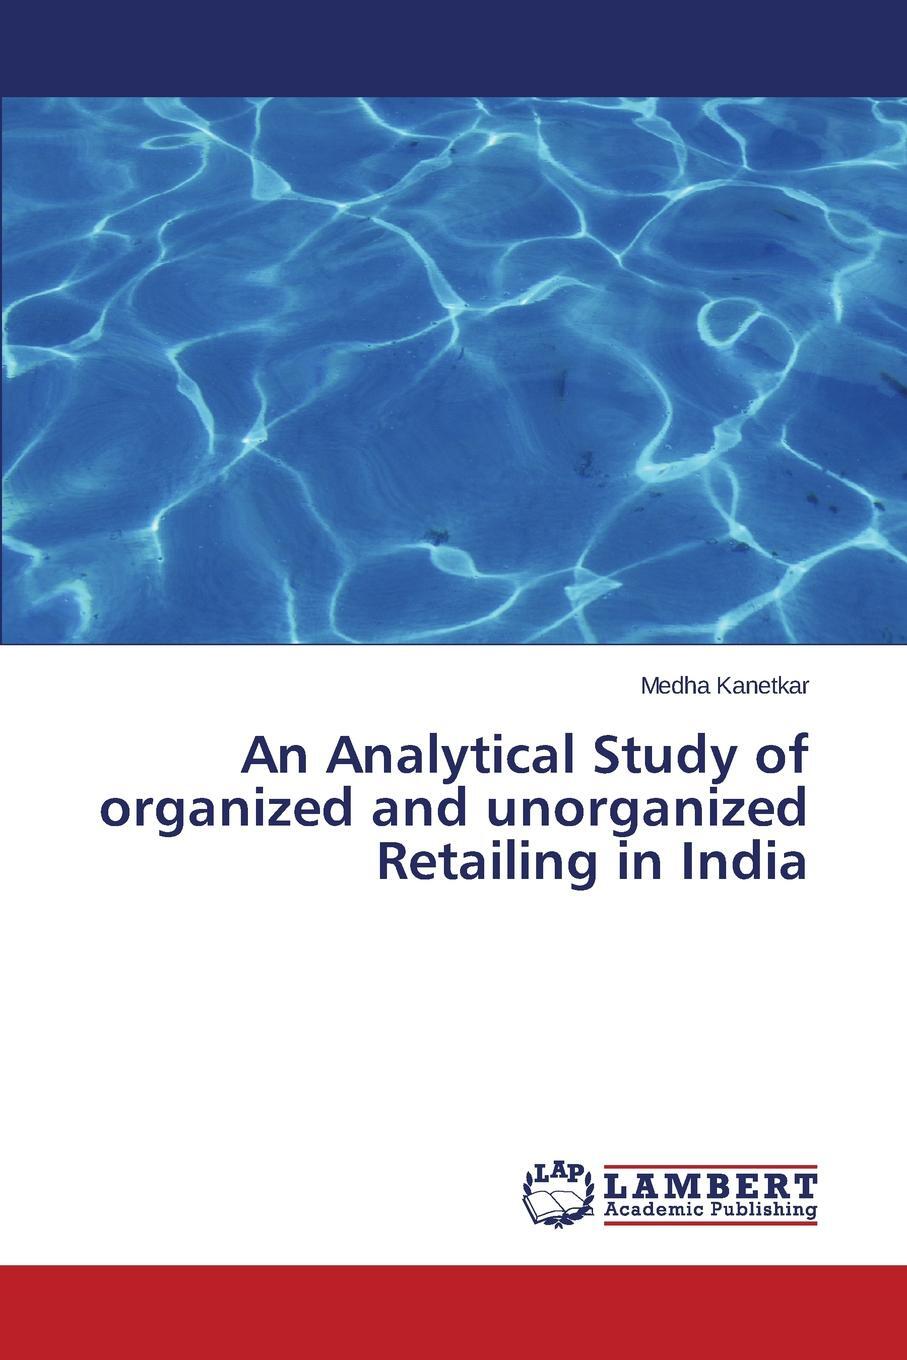 фото An Analytical Study of Organized and Unorganized Retailing in India